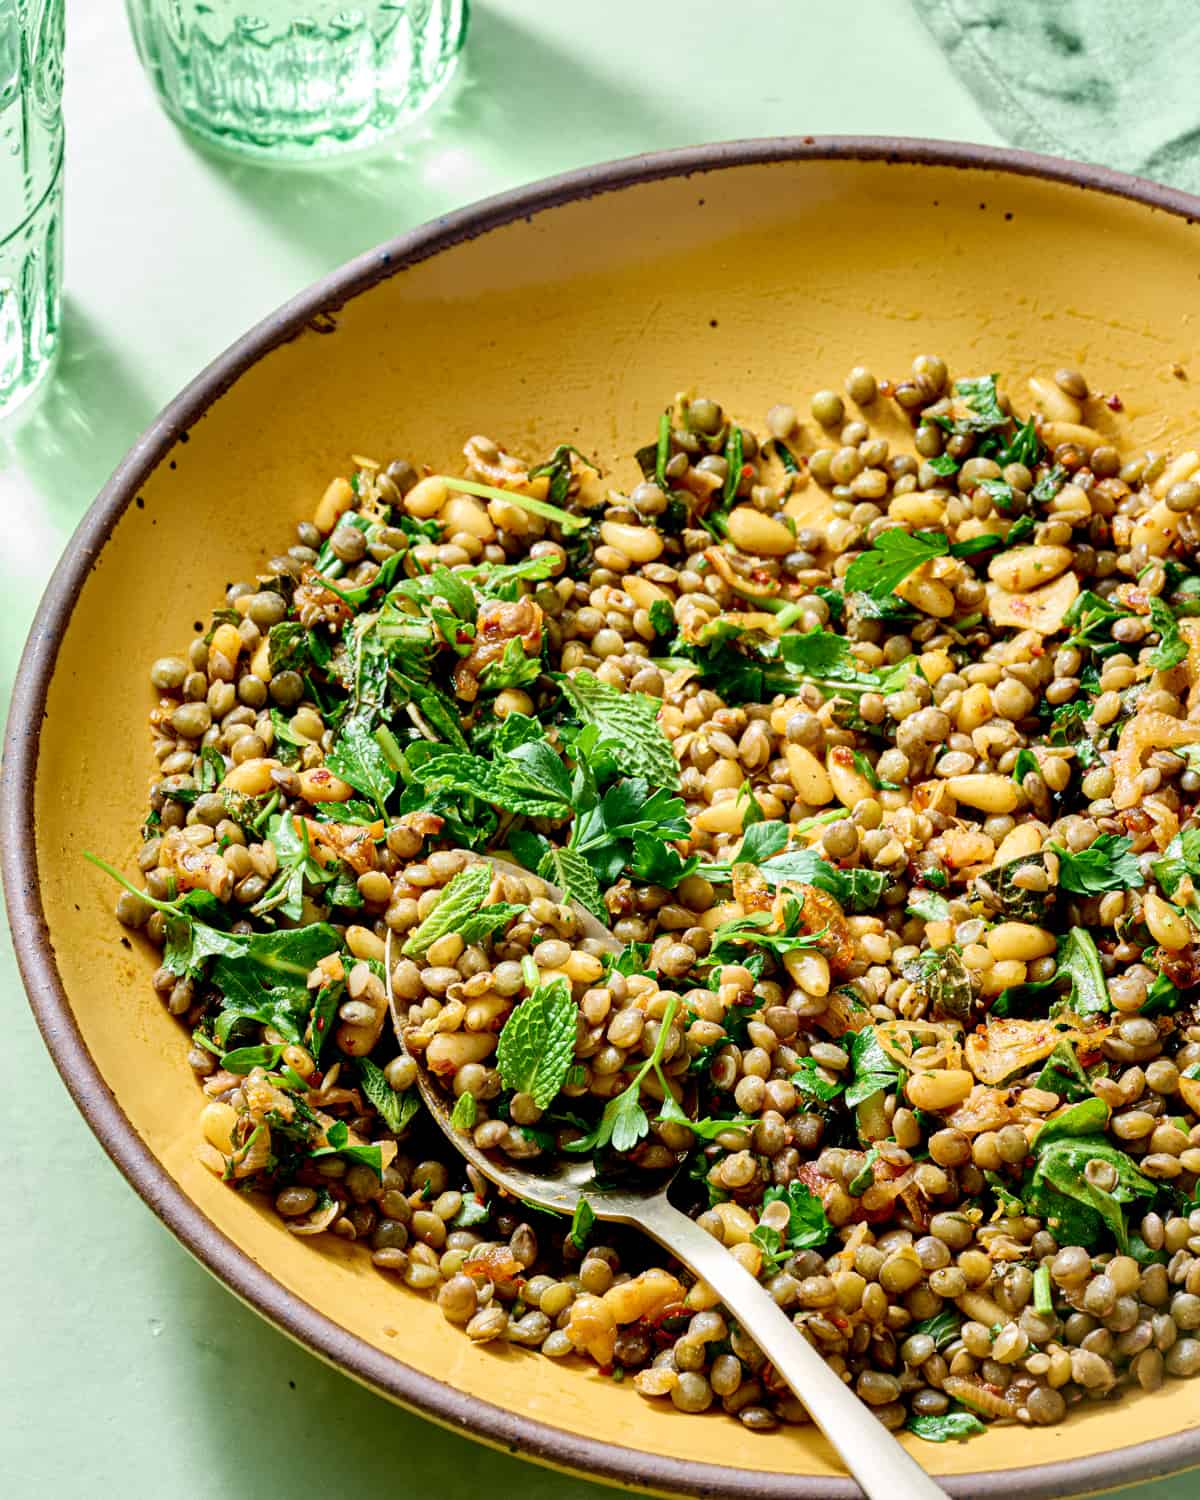 Side view of spoon in a yellow bowl with lentil salad and herbs.